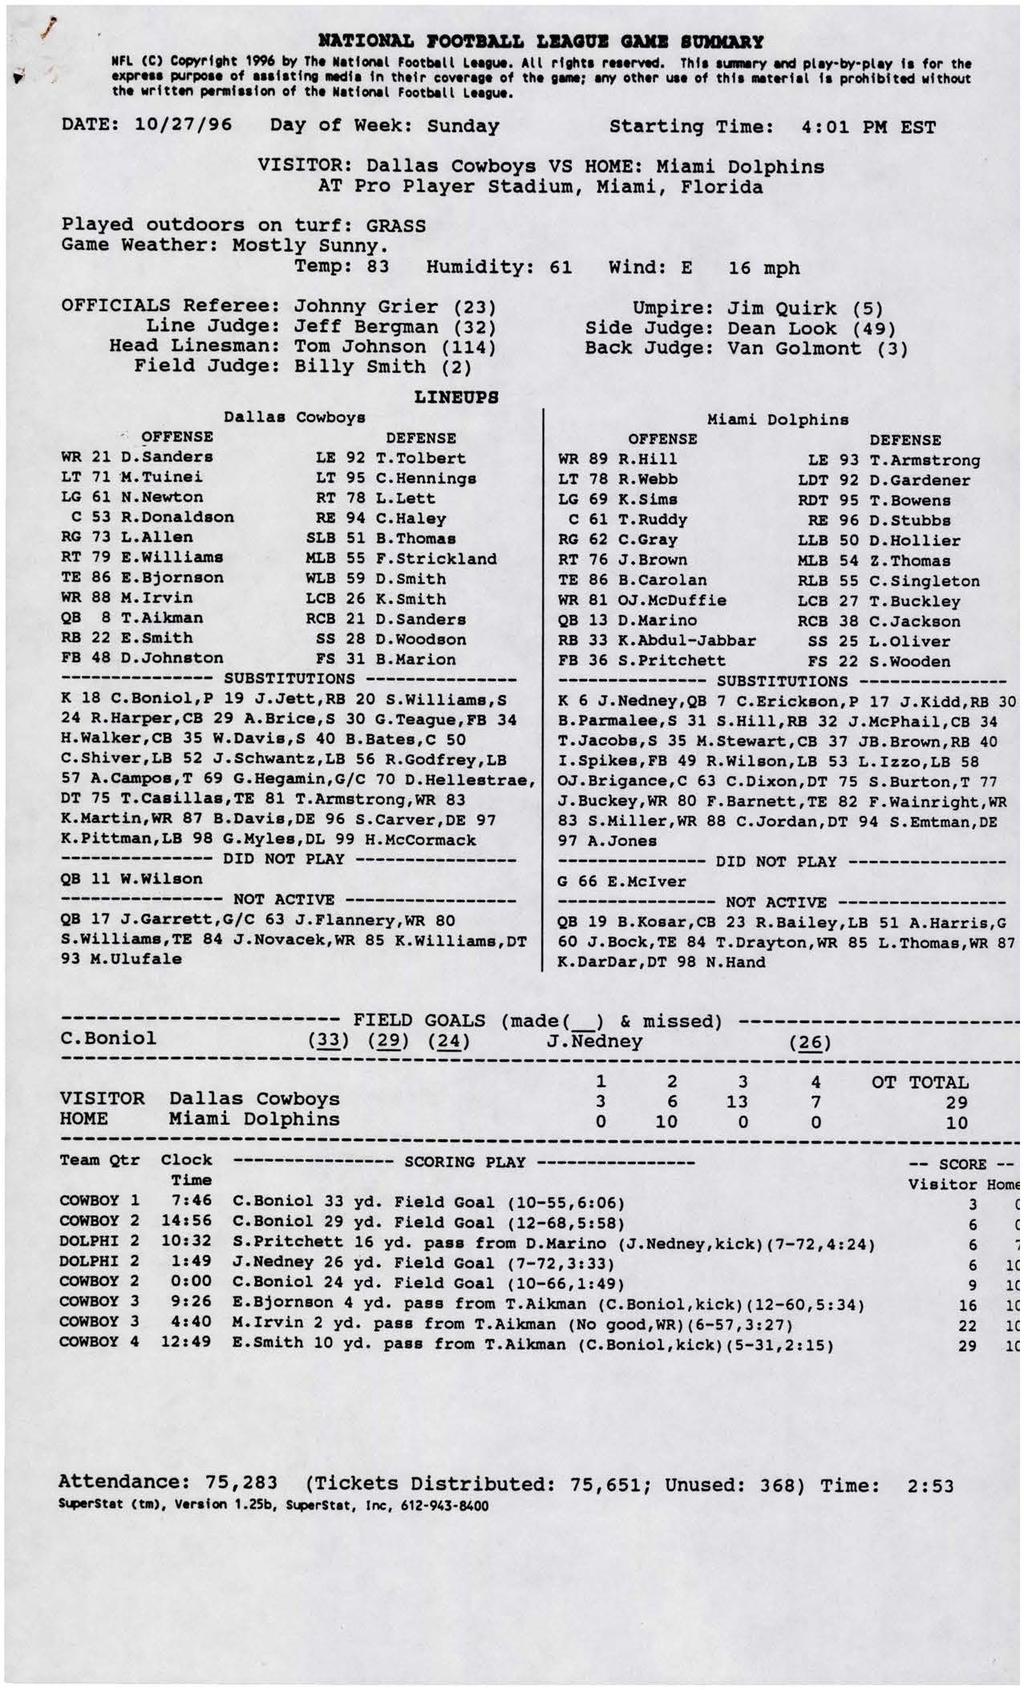 NATIONAL FOOTBALL LEAGUE GAME SUMMARY NFL (C) Copyright 1996 by Thi National Football League. All rights resorved.